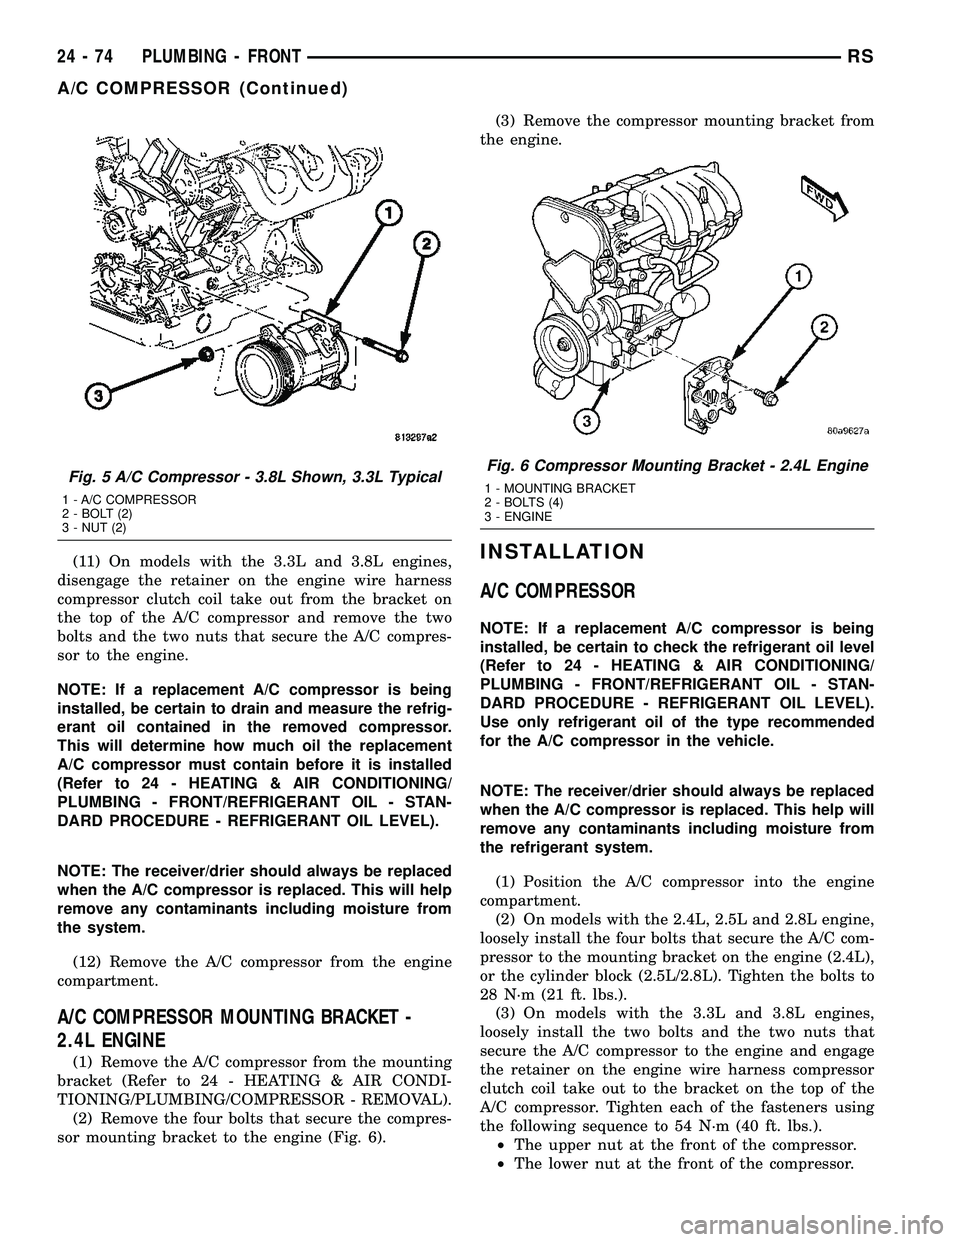 CHRYSLER VOYAGER 2005  Service Manual (11) On models with the 3.3L and 3.8L engines,
disengage the retainer on the engine wire harness
compressor clutch coil take out from the bracket on
the top of the A/C compressor and remove the two
bo